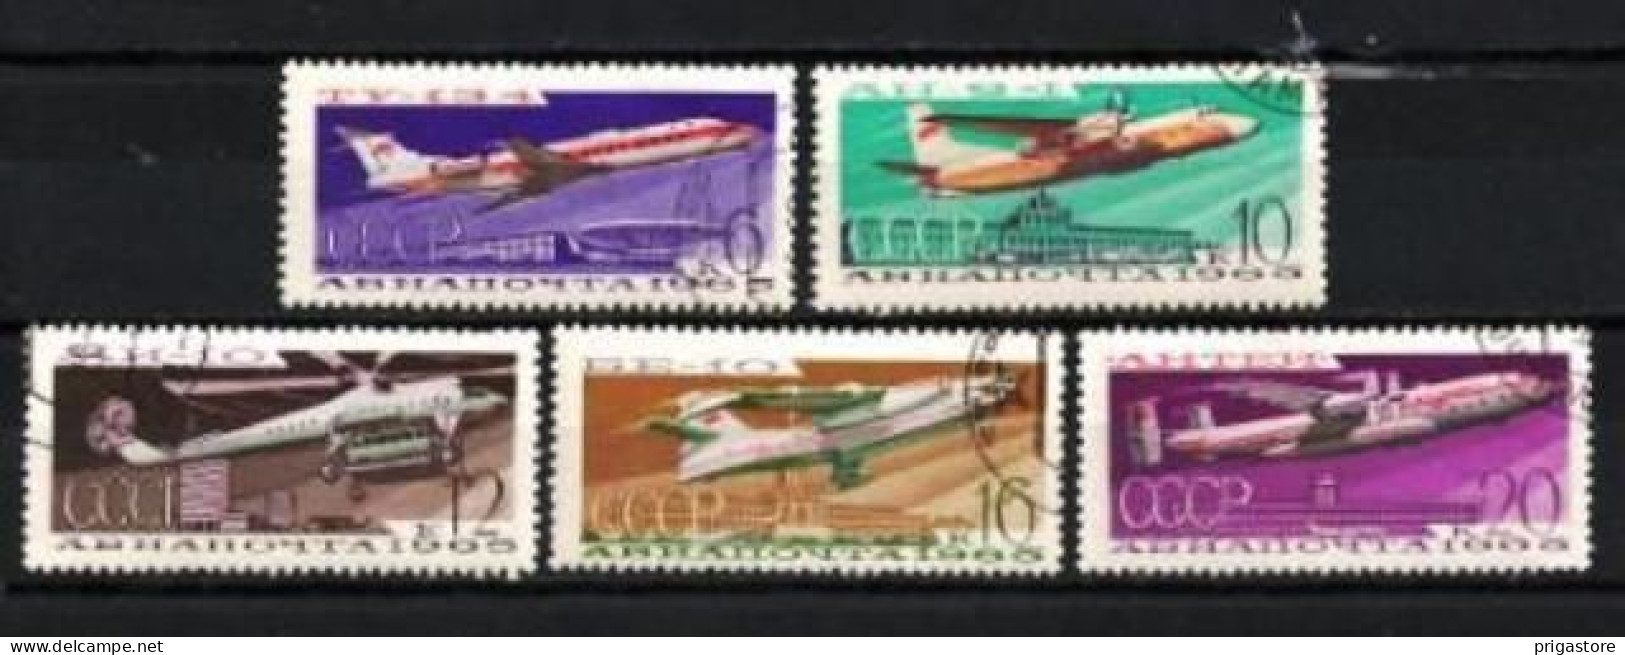 Russie URSS 1965 Avions (6) Yvert N° PA 118 à 122 Oblitéré Used - Used Stamps